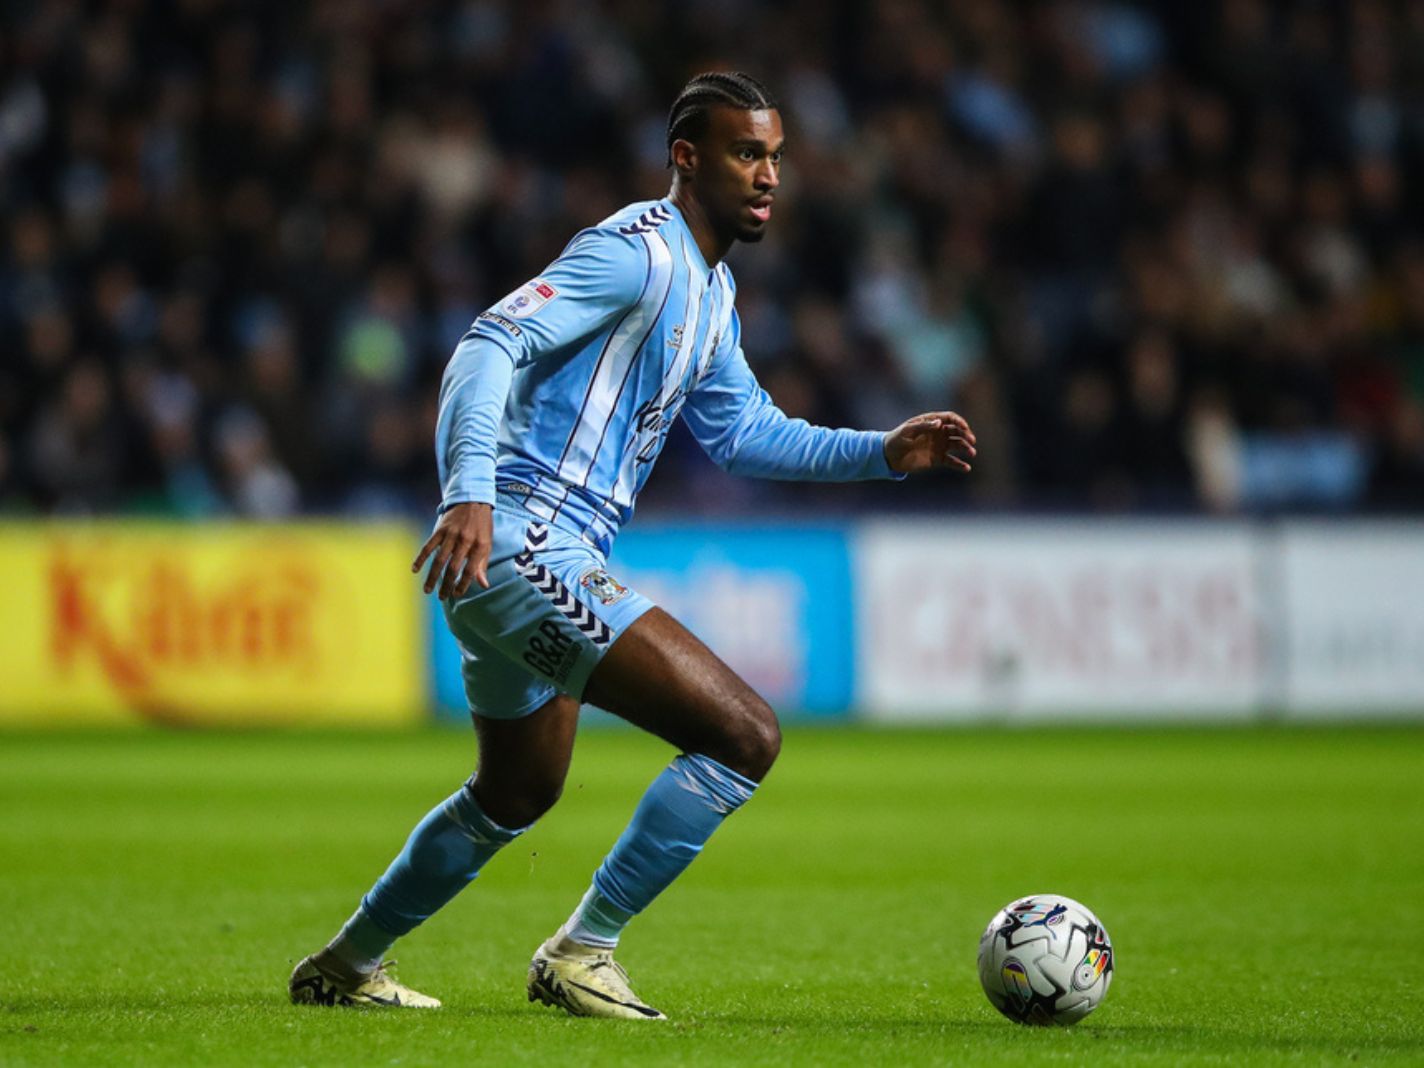 Haji Wright of Coventry City in action during the Sky Bet Championship match Coventry City vs Preston North End at Coventry Building Society Arena, Coventry, United Kingdom, 23rd February 2024 (Photo by Gareth Evans/News Images)